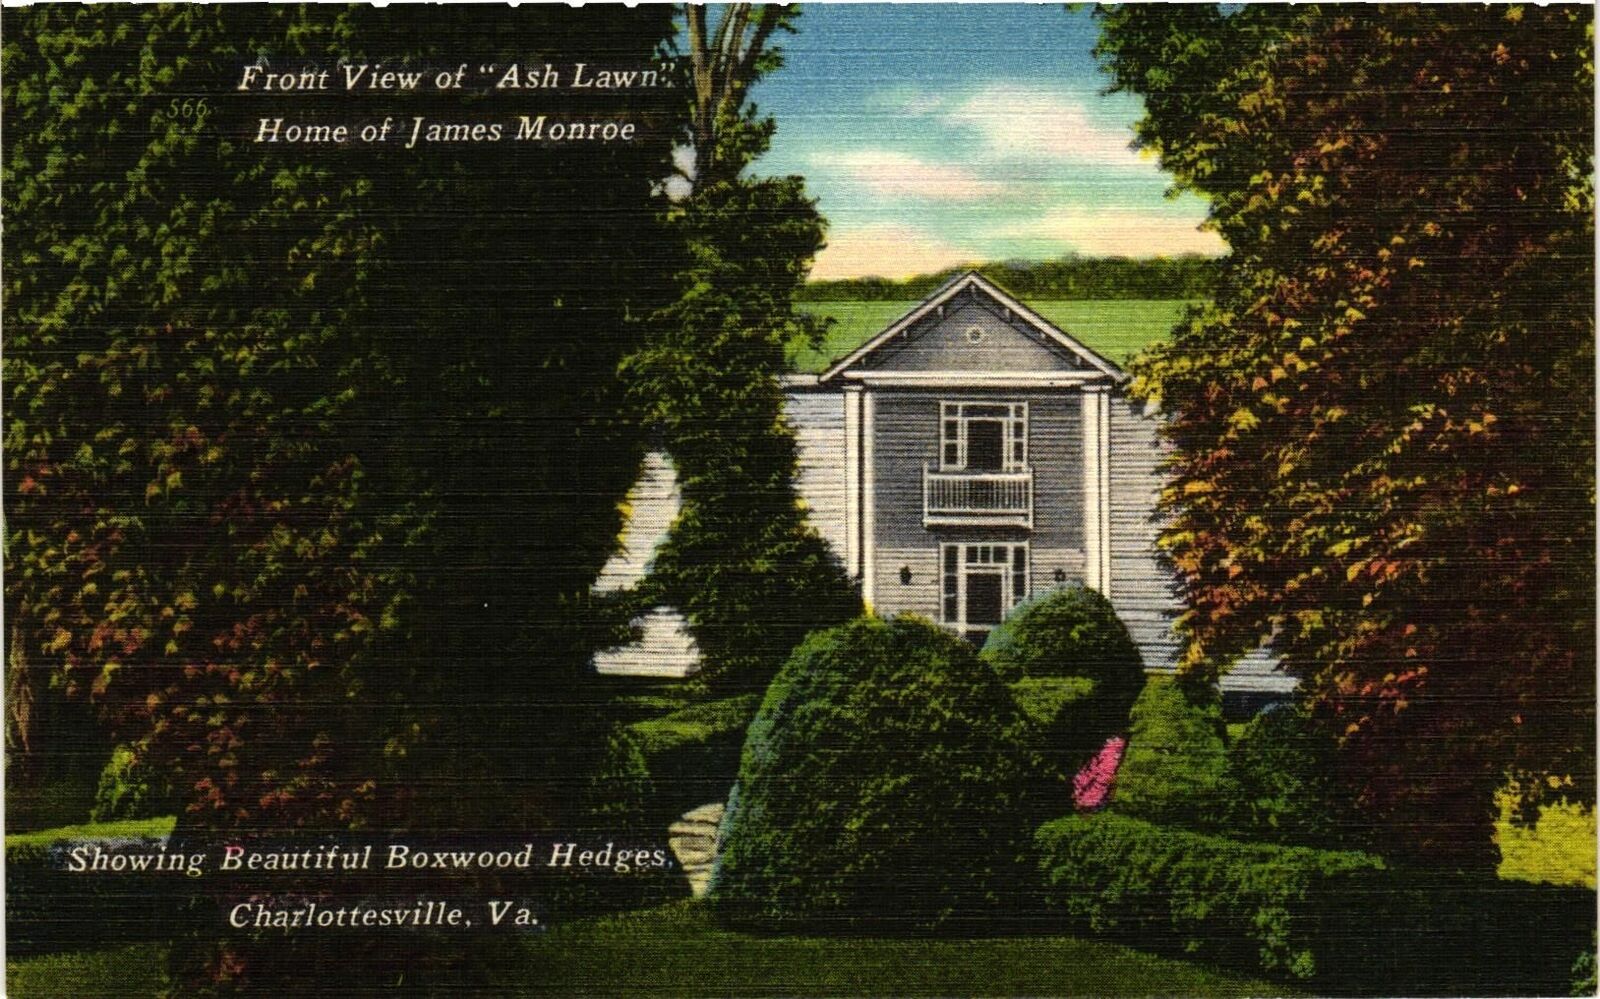 Vintage Postcard- FRONT VIEW OF ASH LAWN, HOME OF JAMES MONROE, CHARLOTTESVILLE,